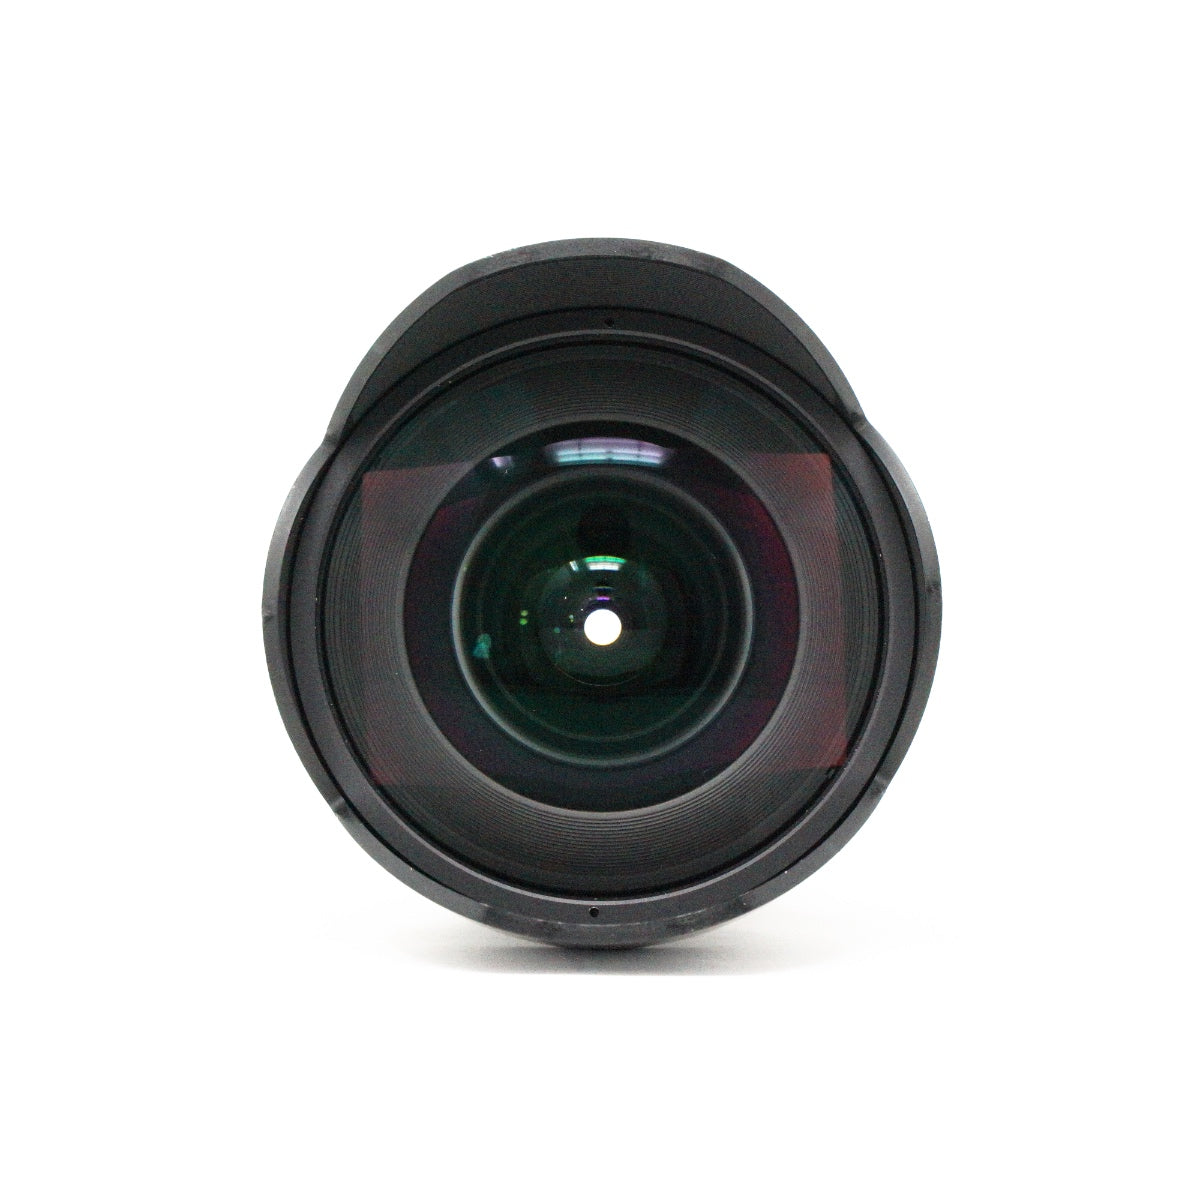 Used Samyang 14mm F2.8 ED AS IF UMC Ultra wide lens for Sony E-Mount 